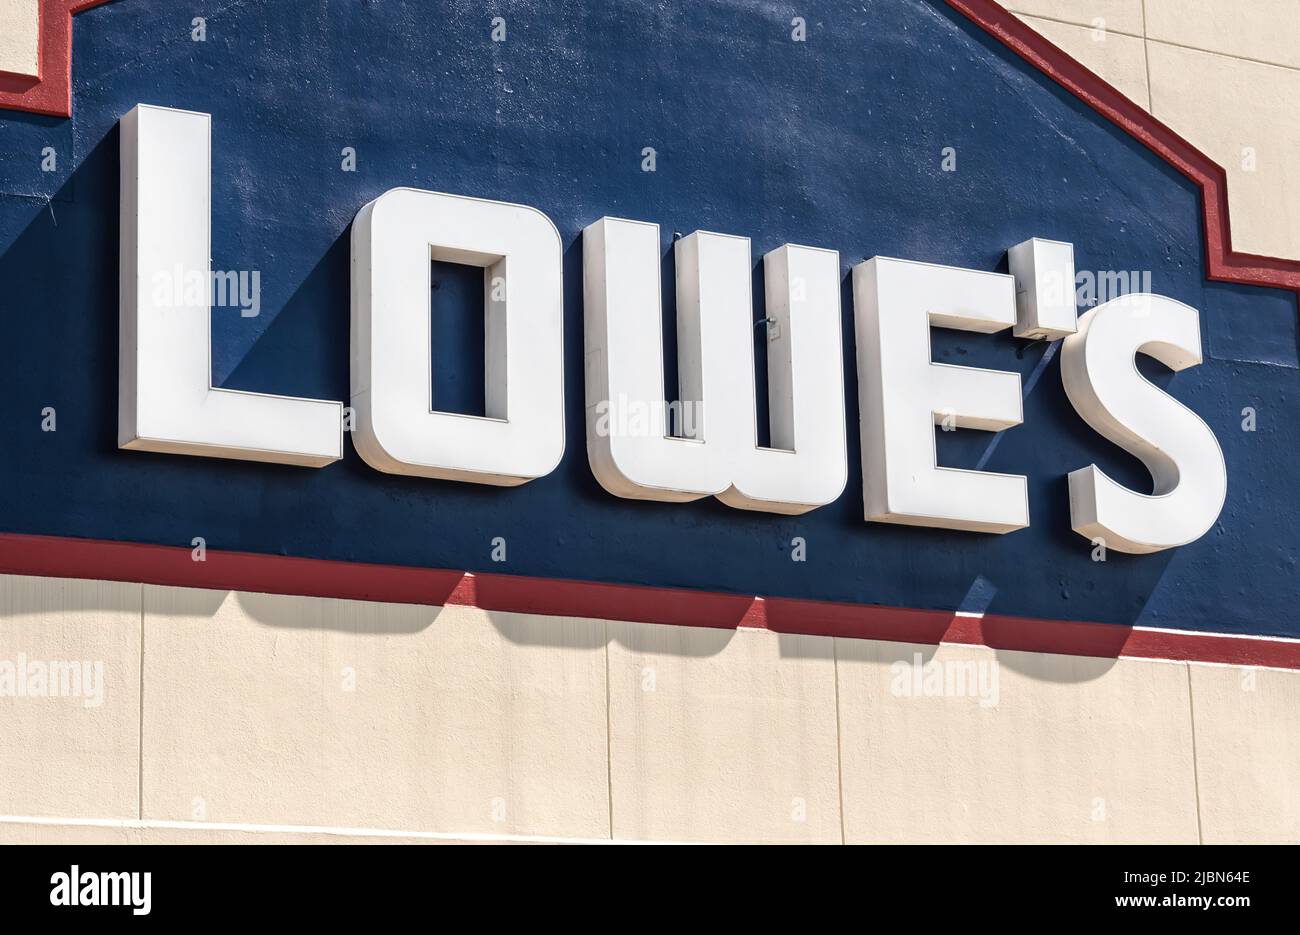 Lowe's home improvement store's facade brand and logo signage in   three dimensional, white letters on dark blue background in sunny daylight. Stock Photo